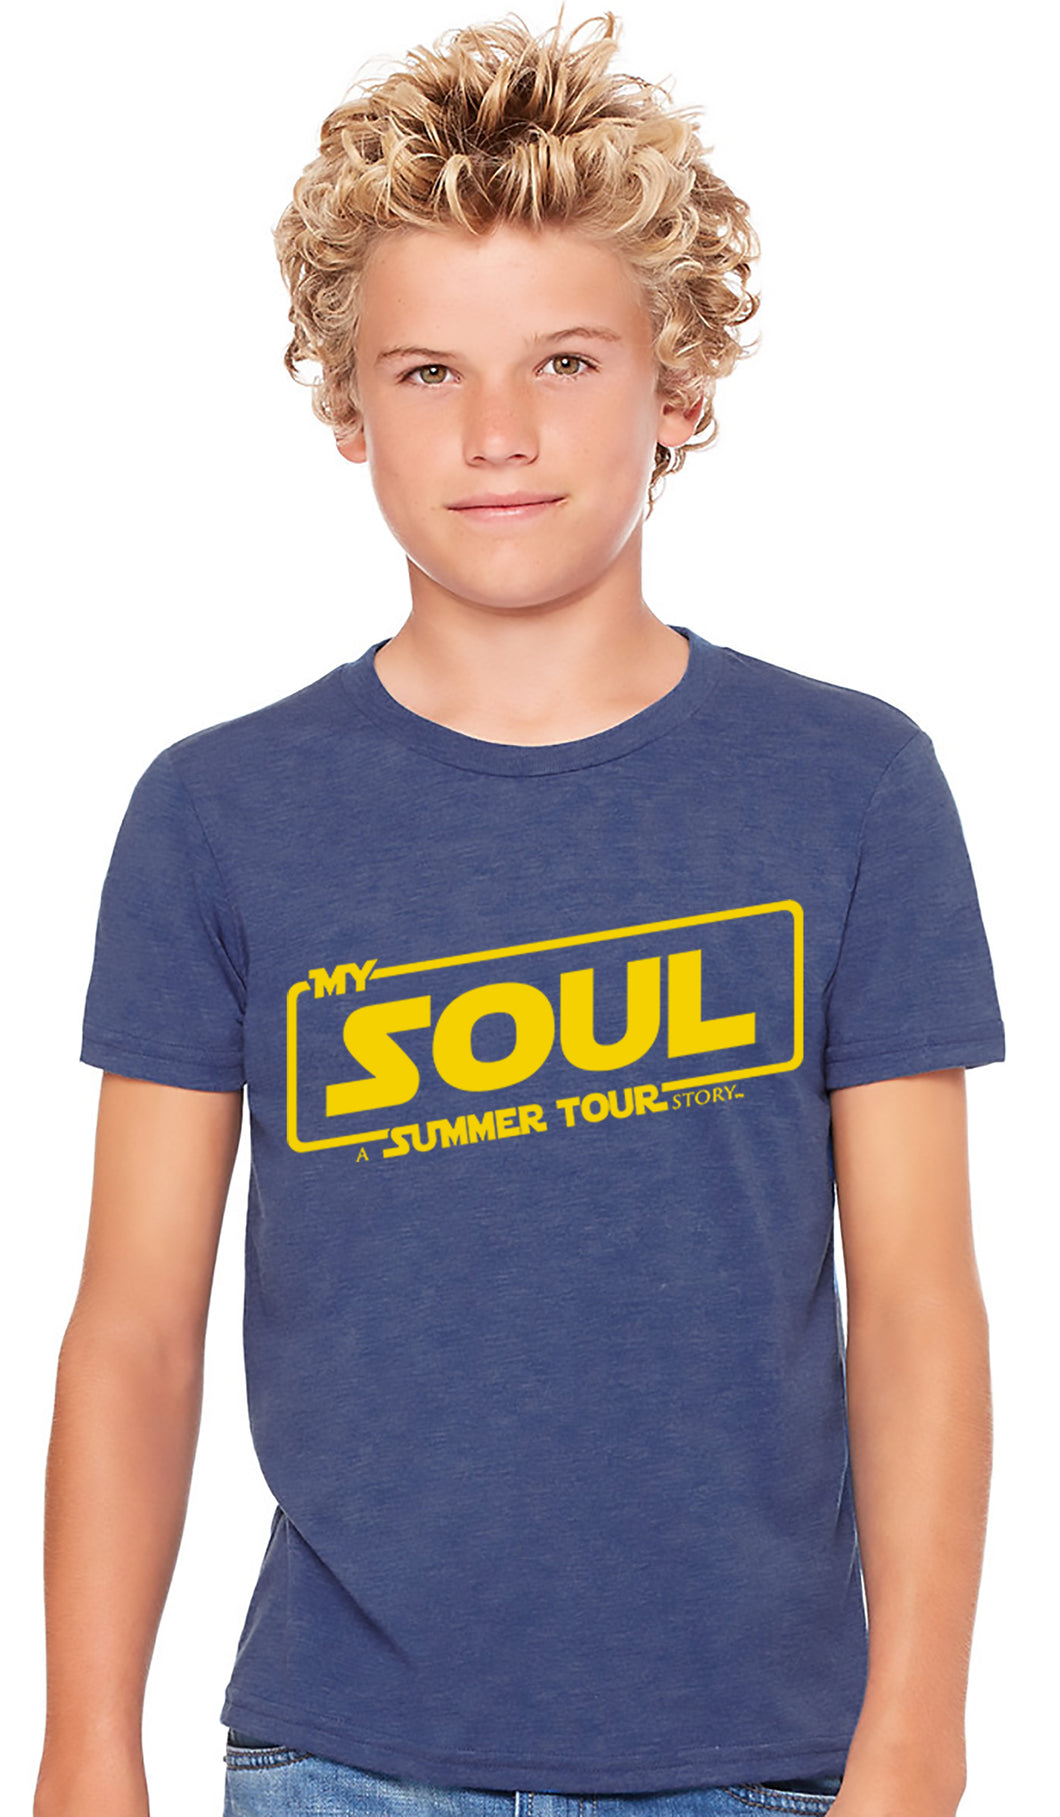 My Soul - A Summer Tour Story - Youth Tees